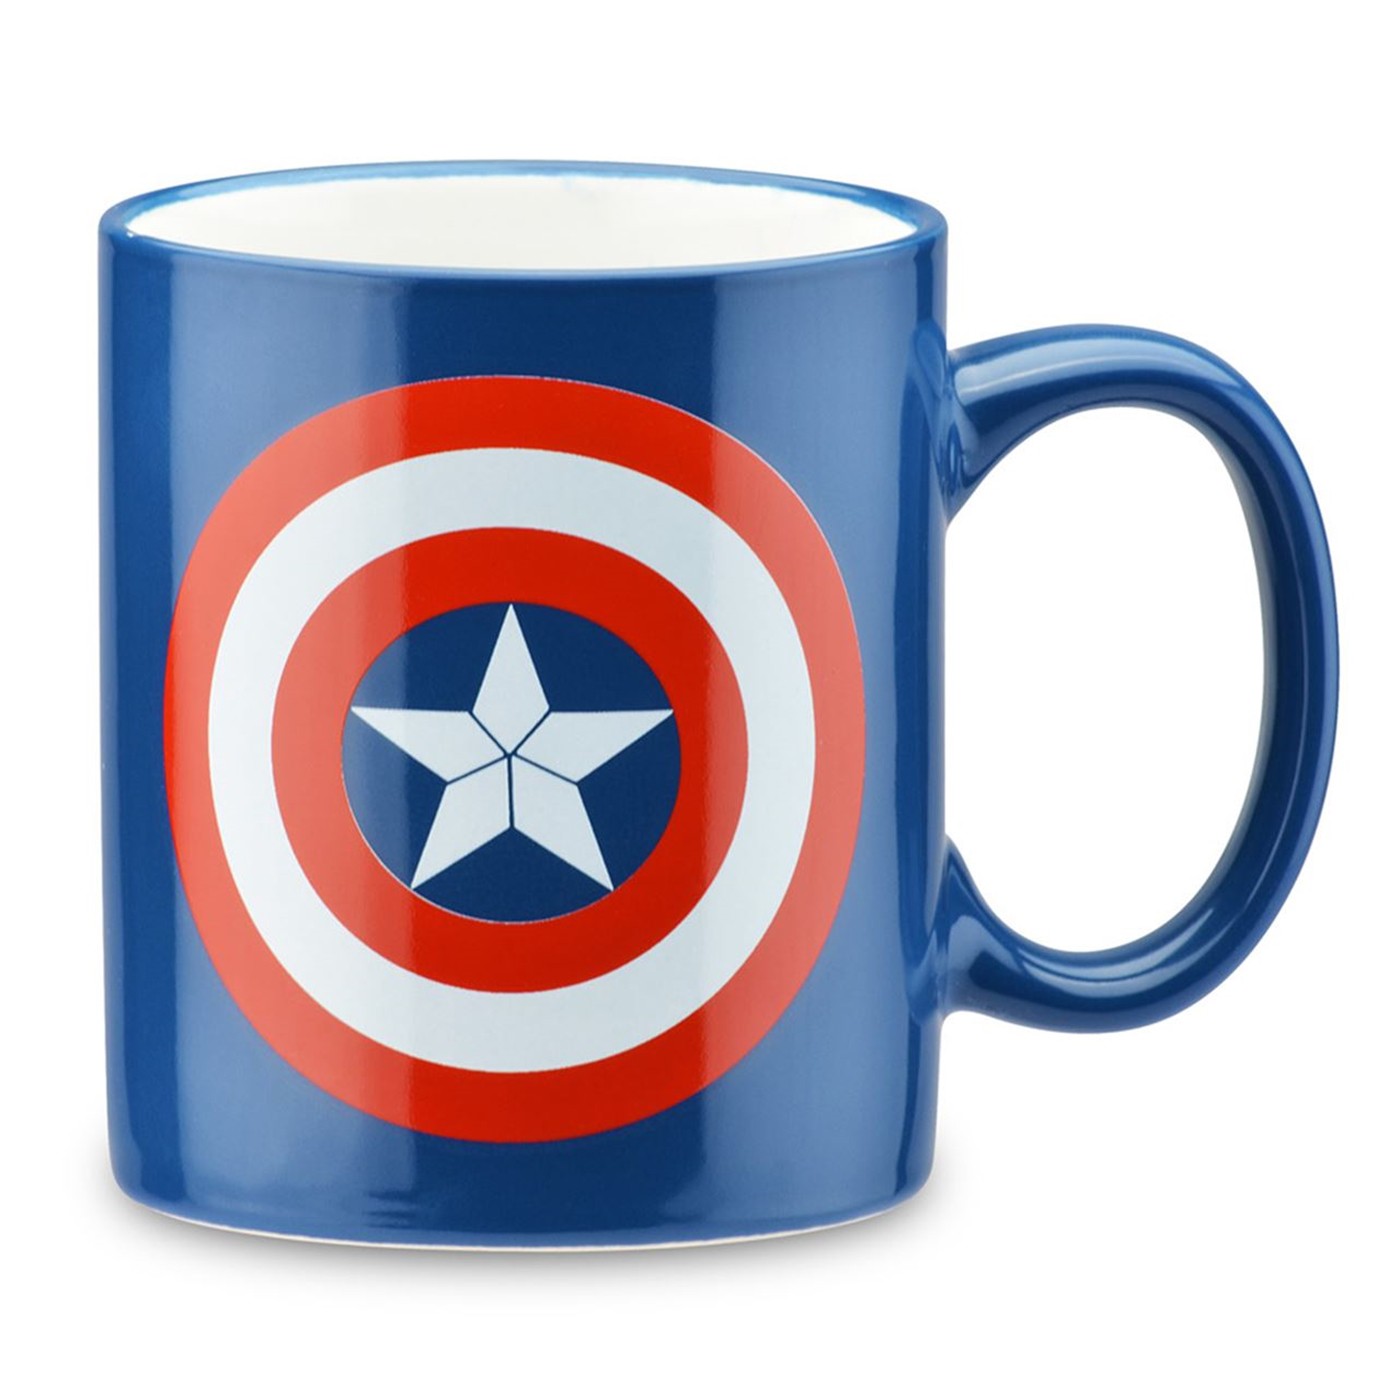 Captain America 1-Cup Coffee Maker with Mug